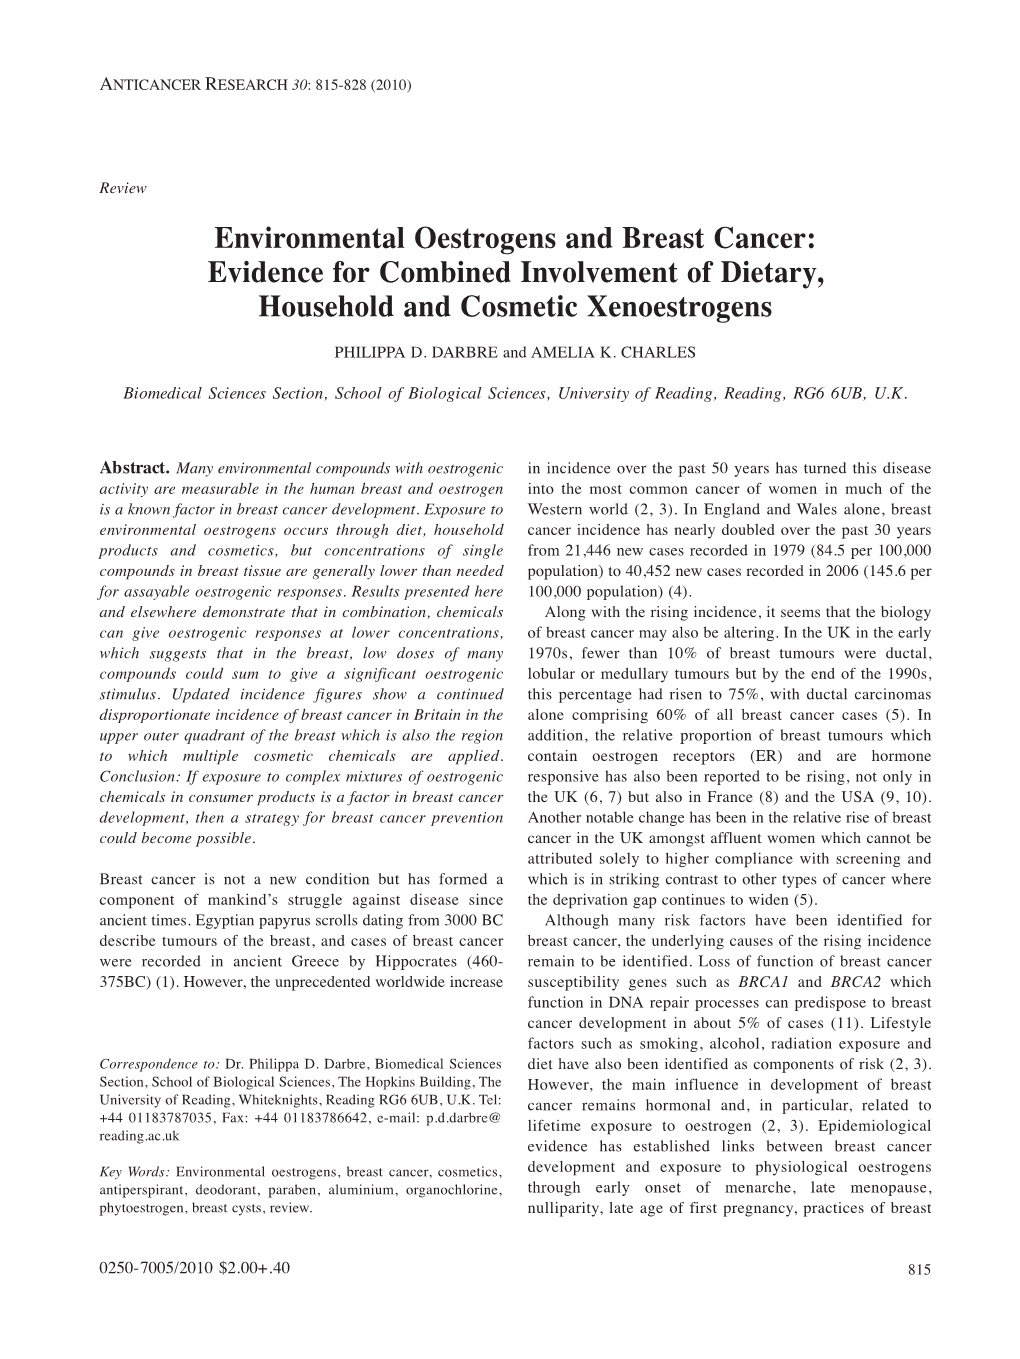 Environmental Oestrogens and Breast Cancer: Evidence for Combined Involvement of Dietary, Household and Cosmetic Xenoestrogens